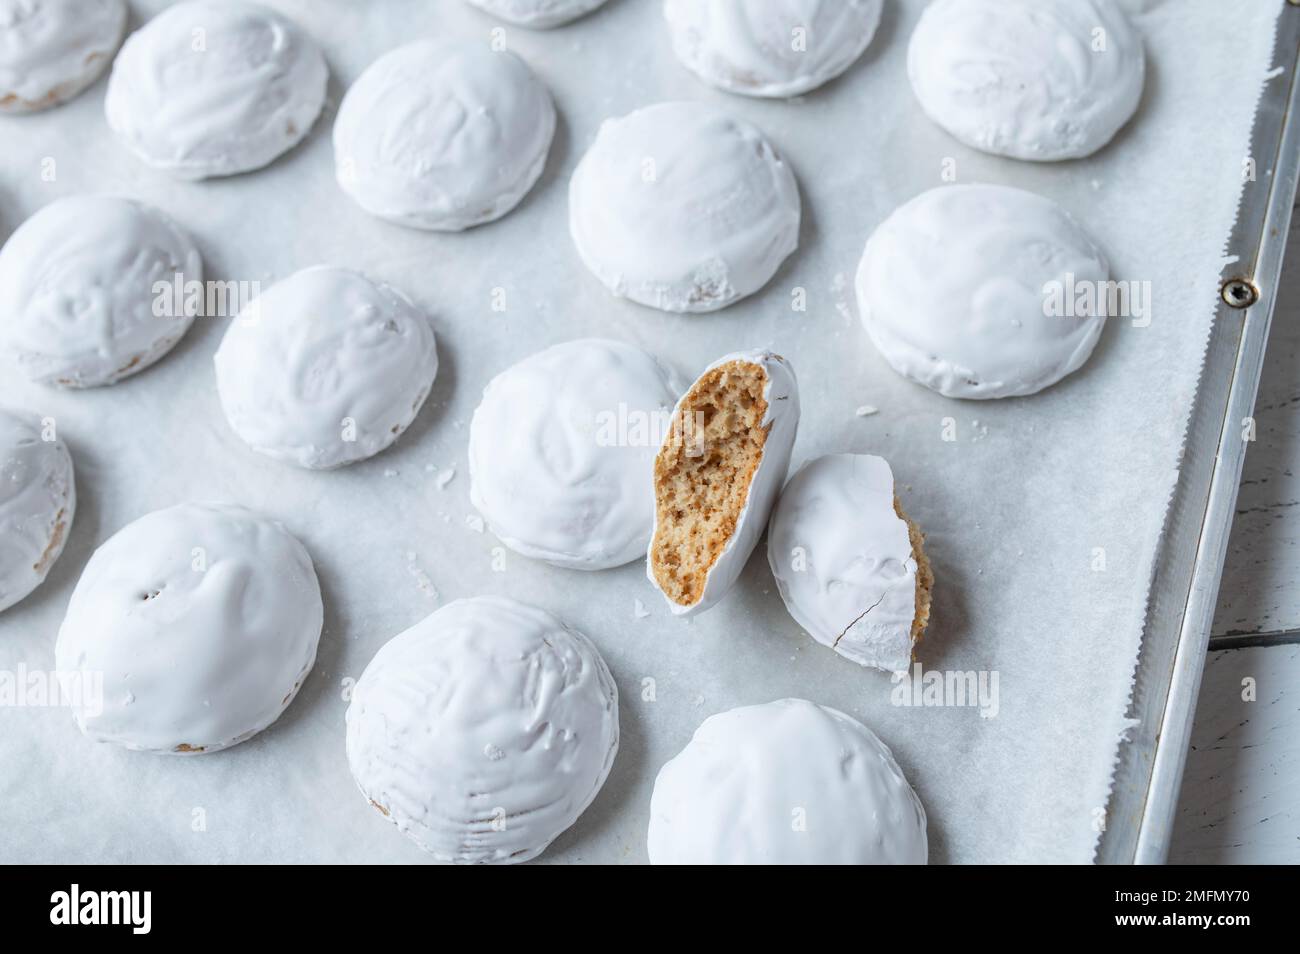 Fresh baked gingerbread cookies with egg white icing on a baking sheet Stock Photo